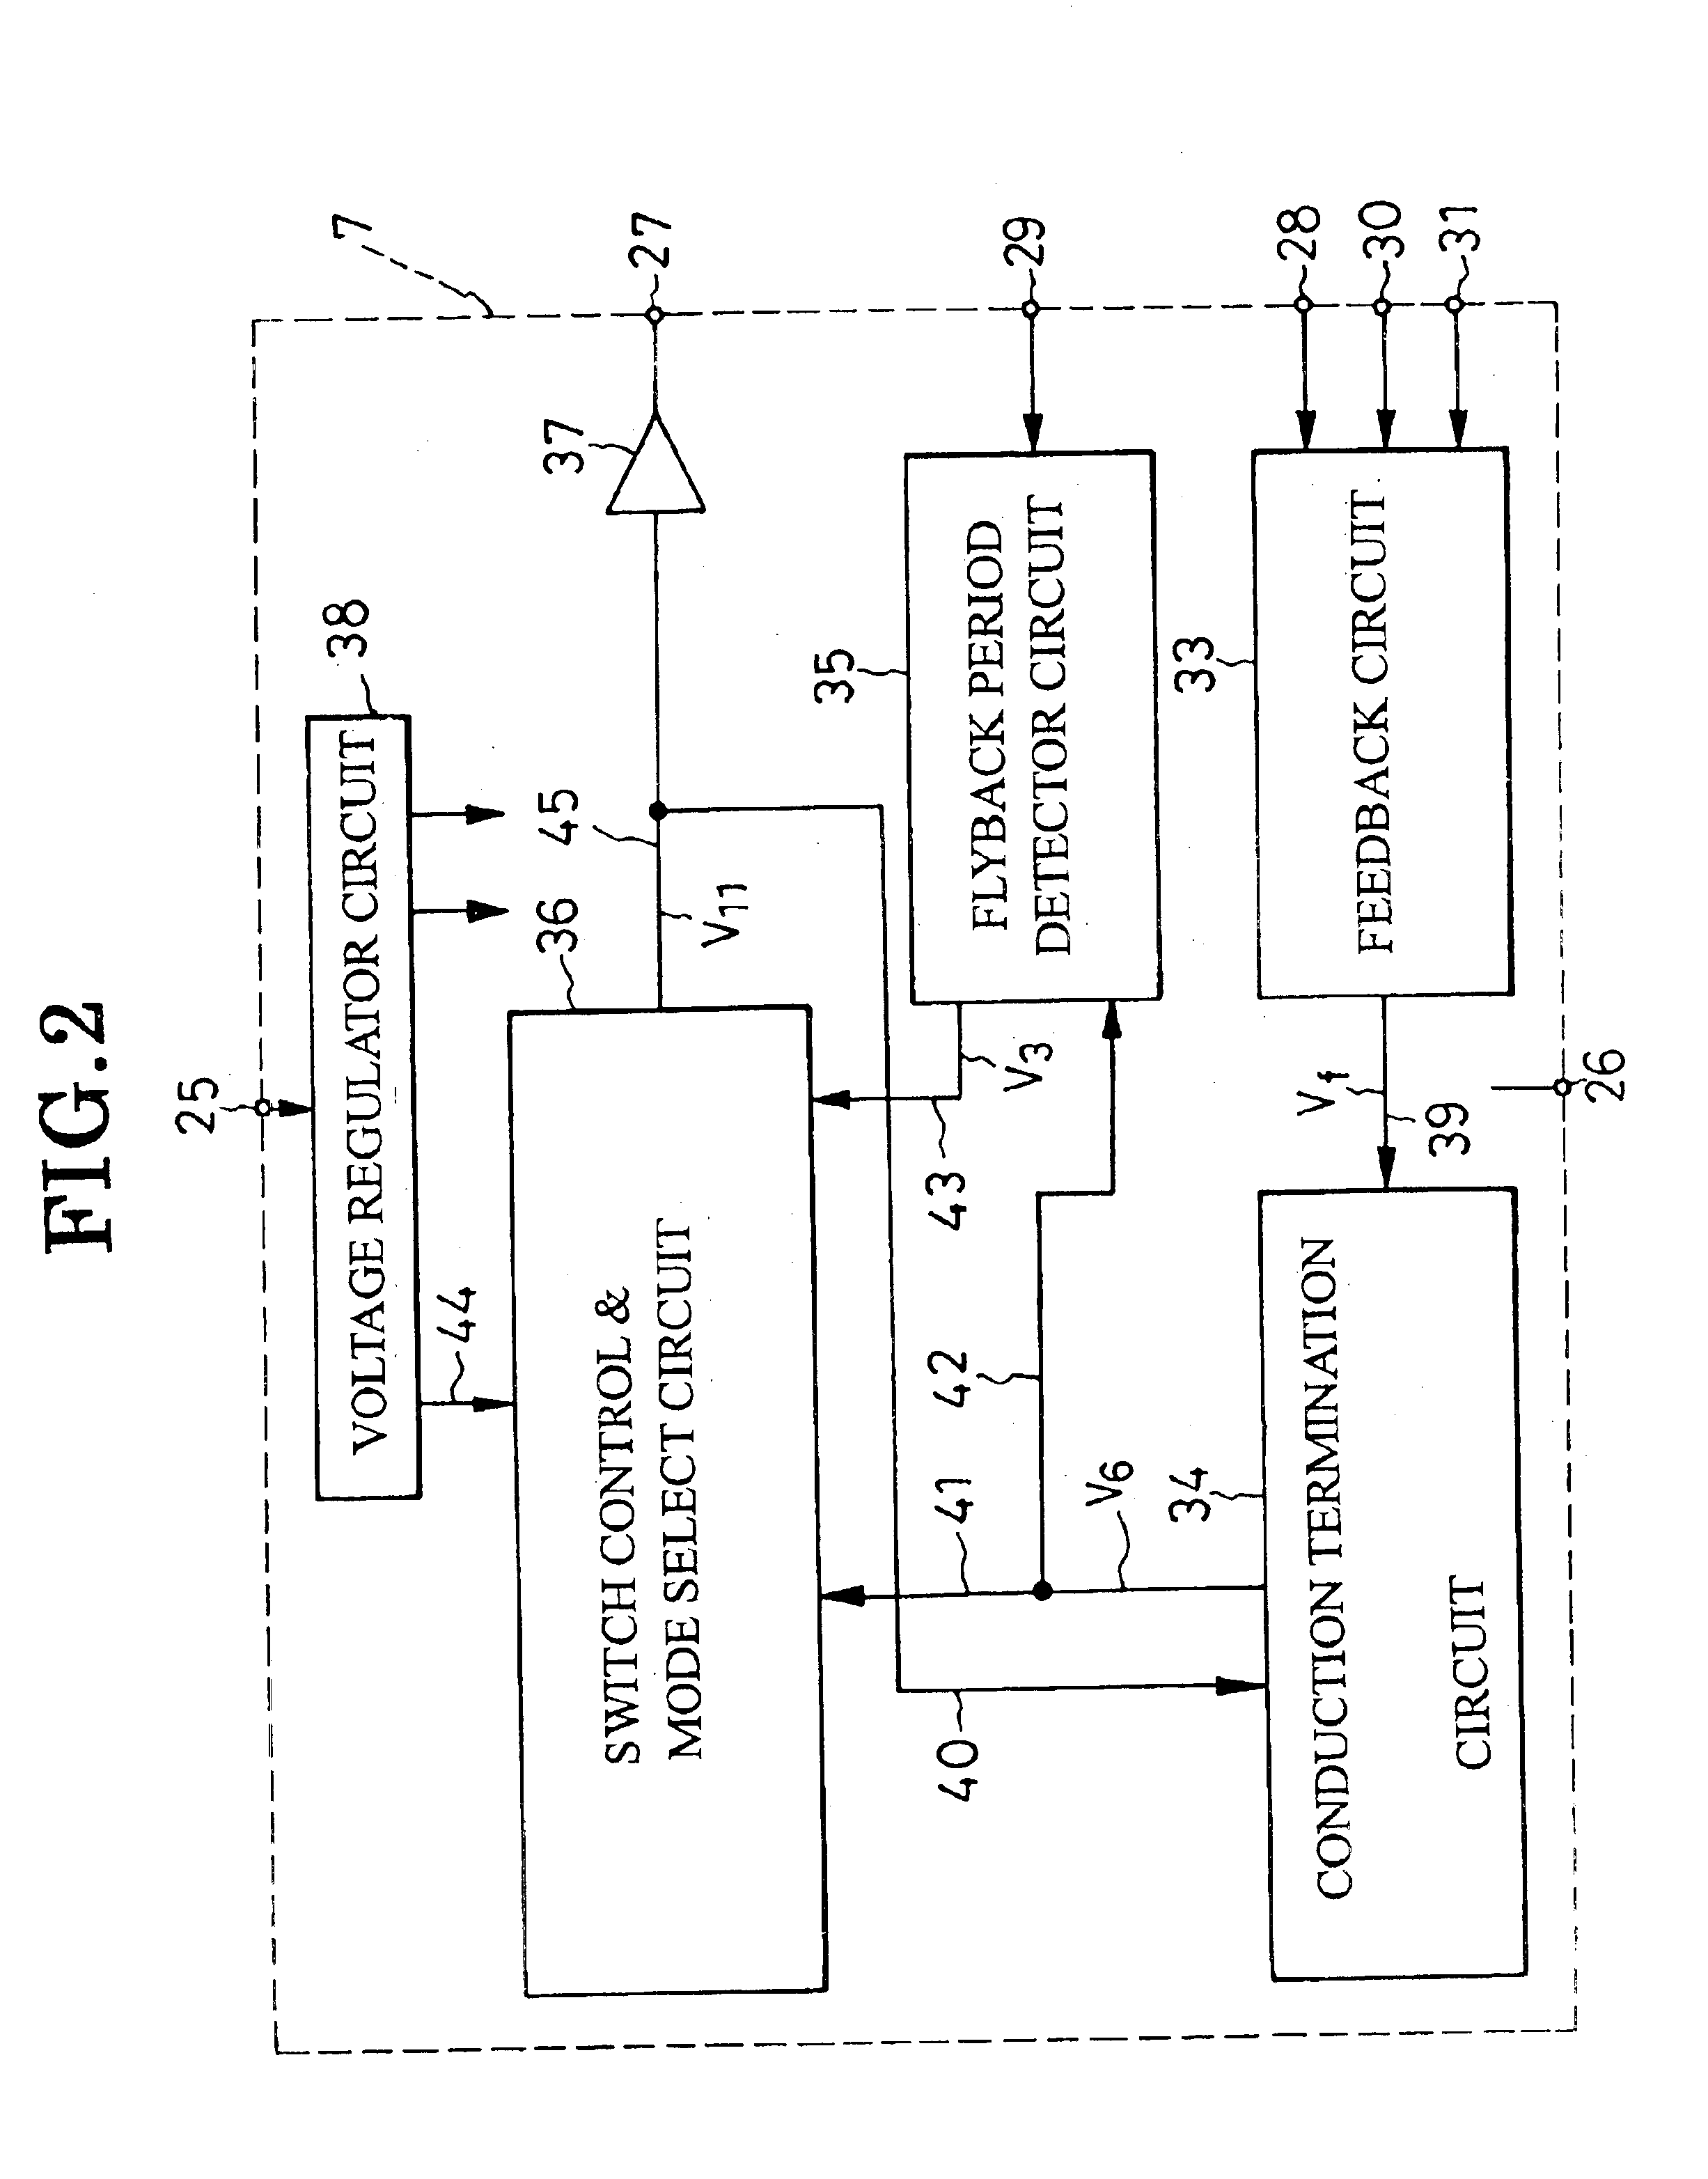 Dc-to-dc converter with flyback period detector circuit